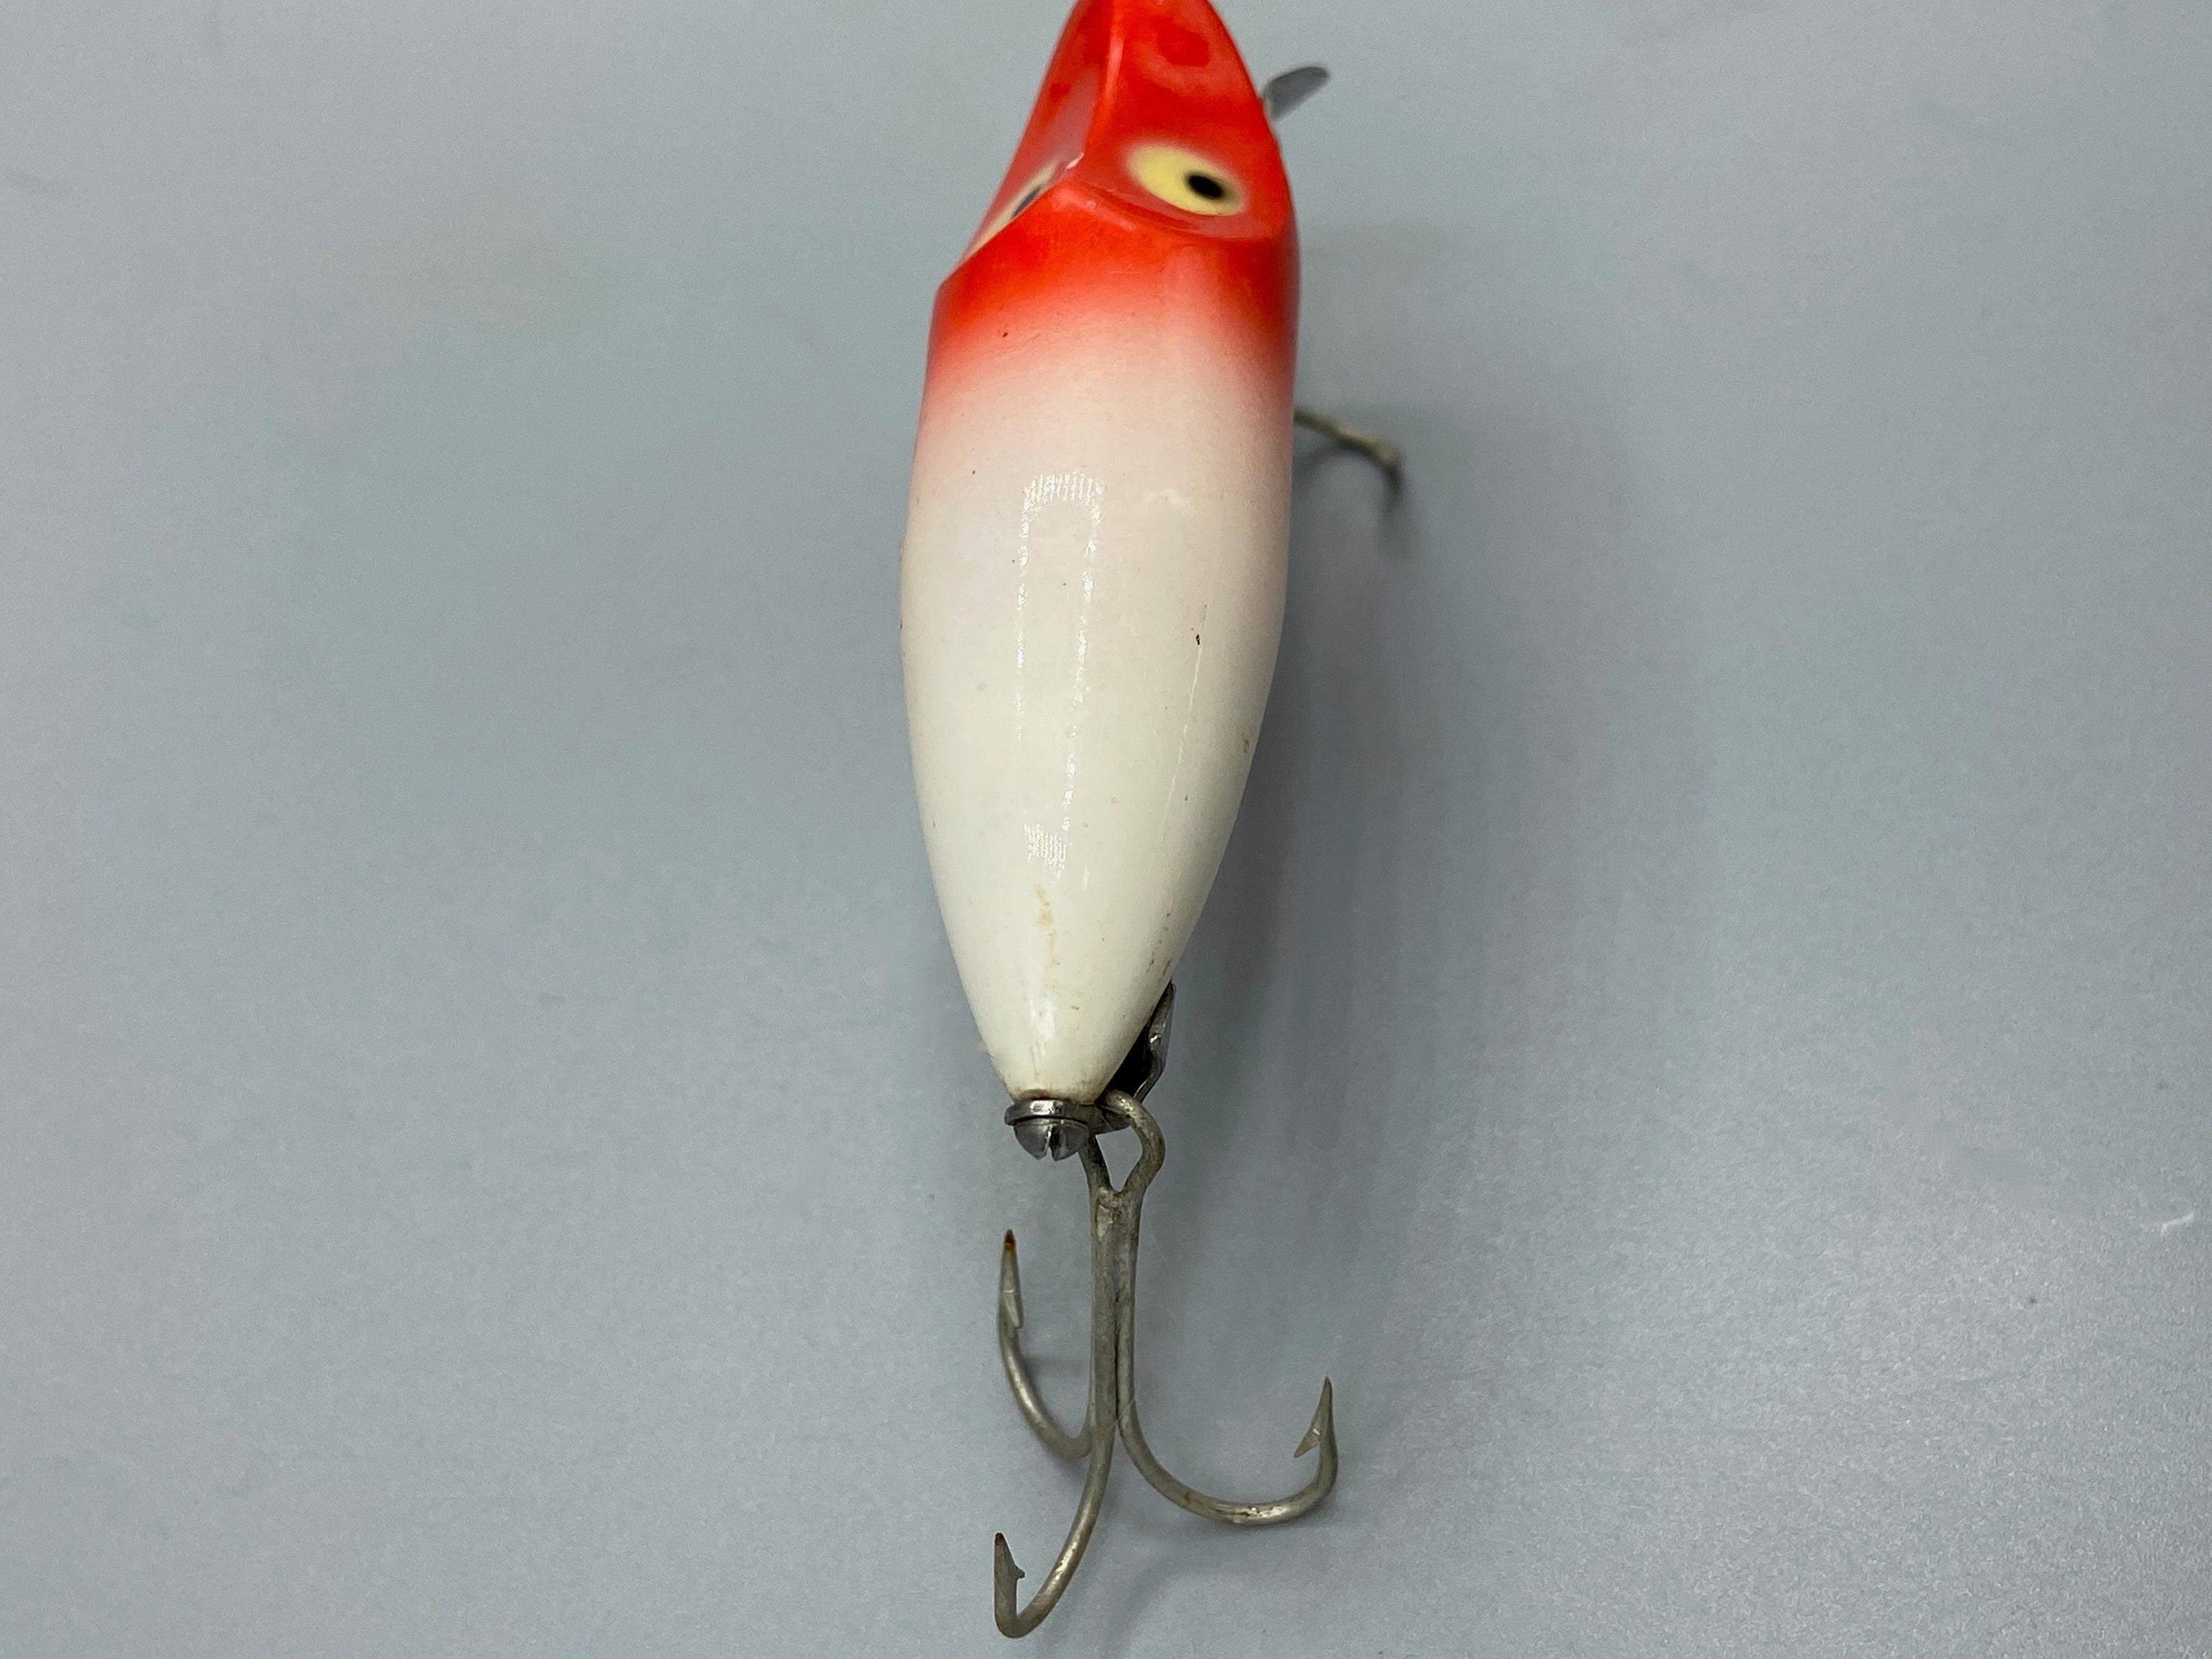 Vintage Fishing Lure, Heddon River Runt, White Red Head